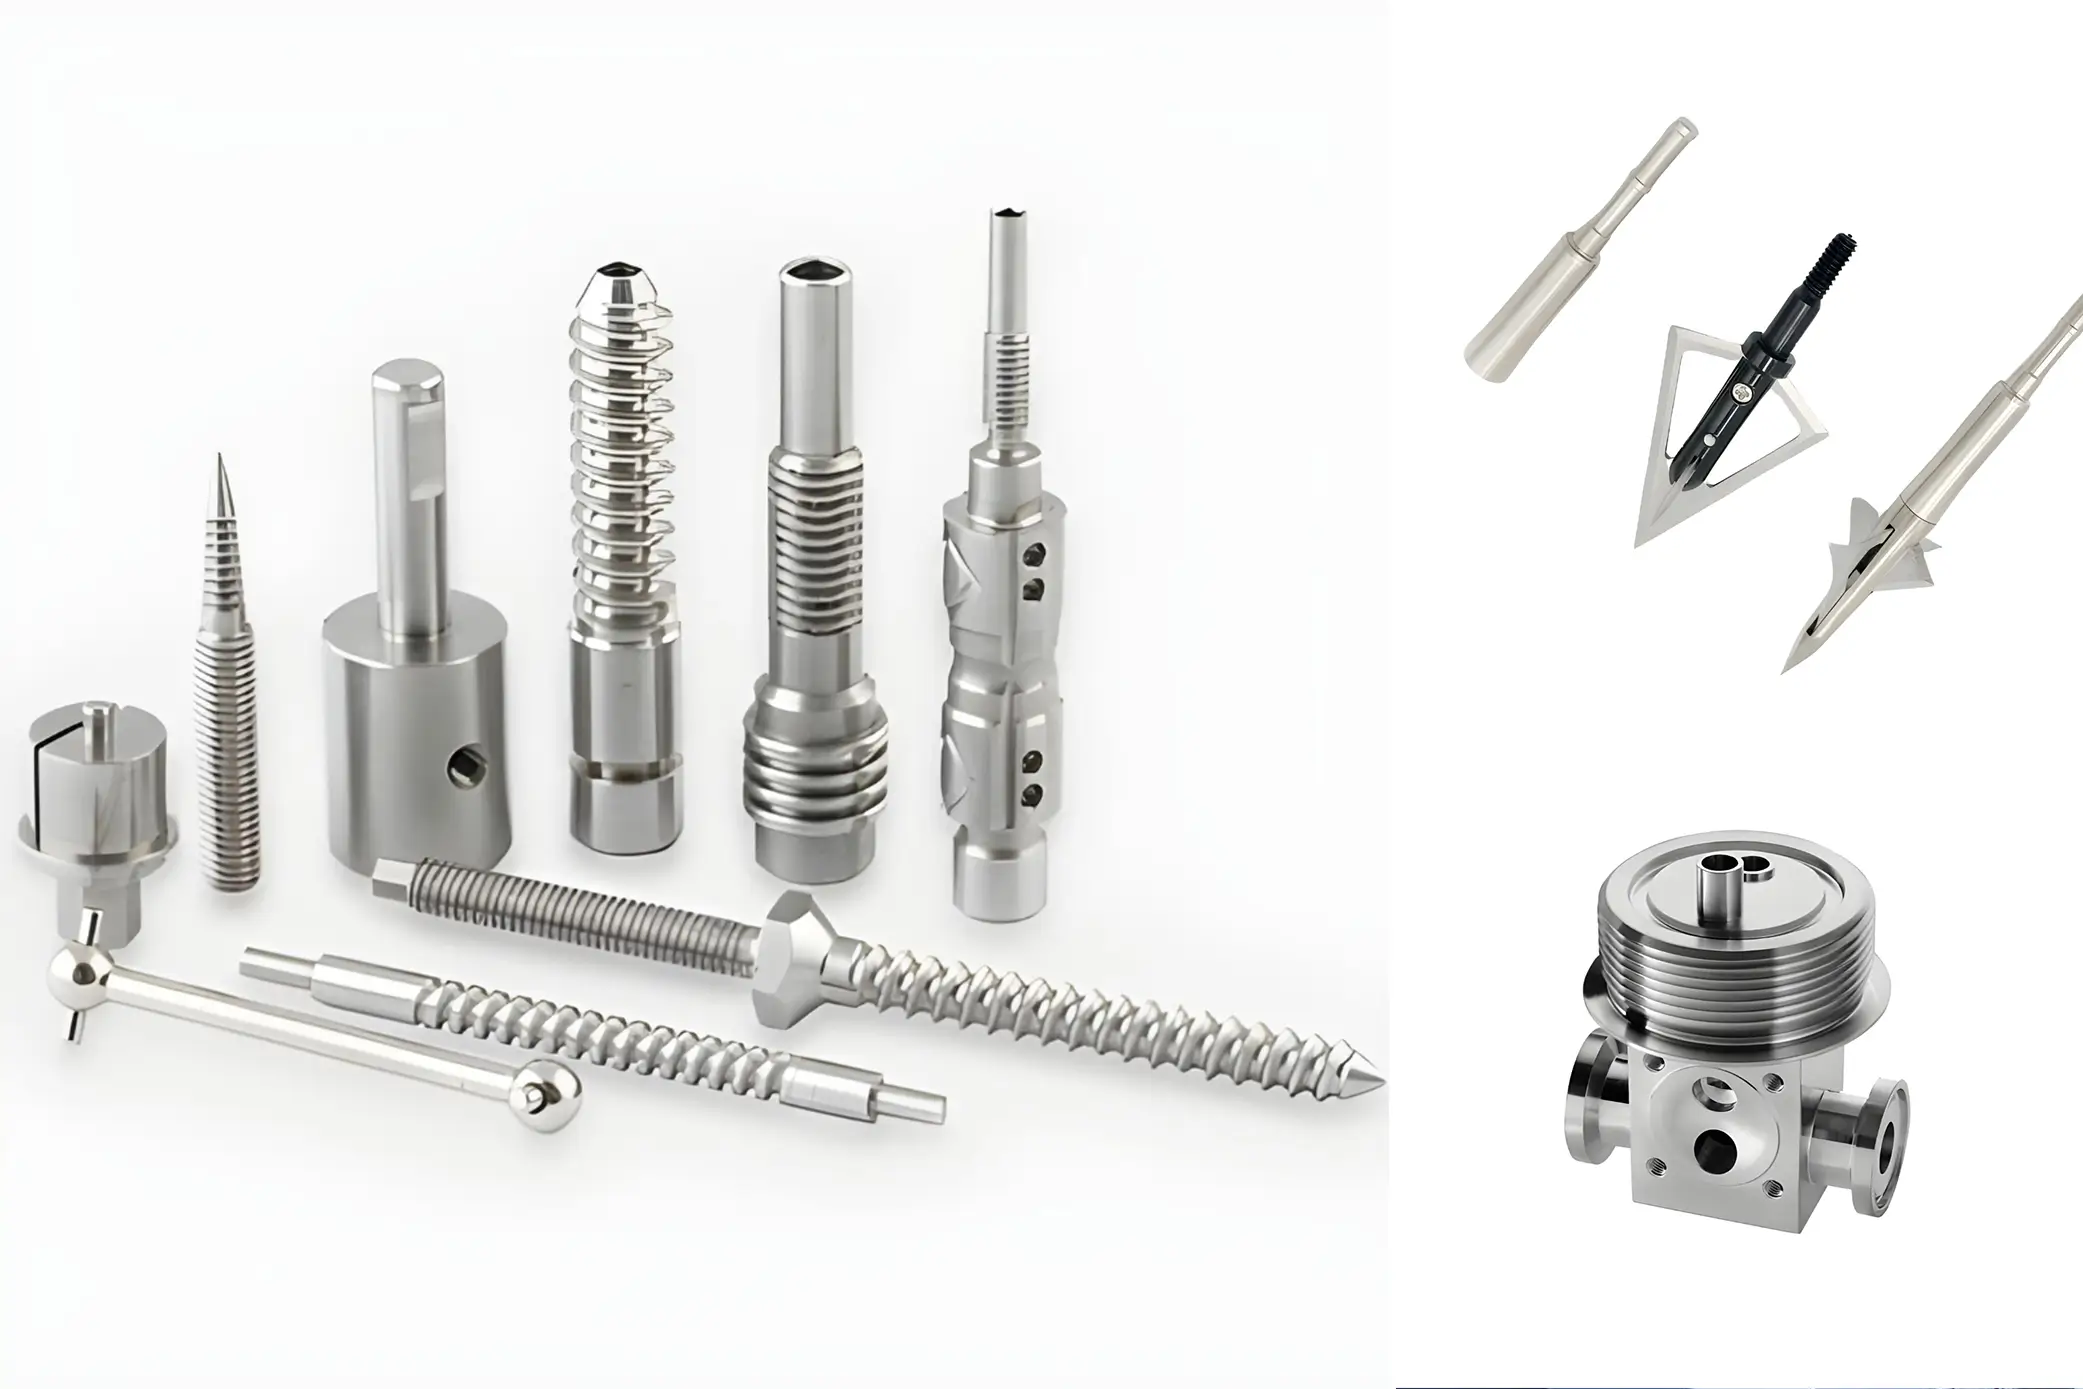 Why Choose Us As Your Custom Medical Components Manufacturer